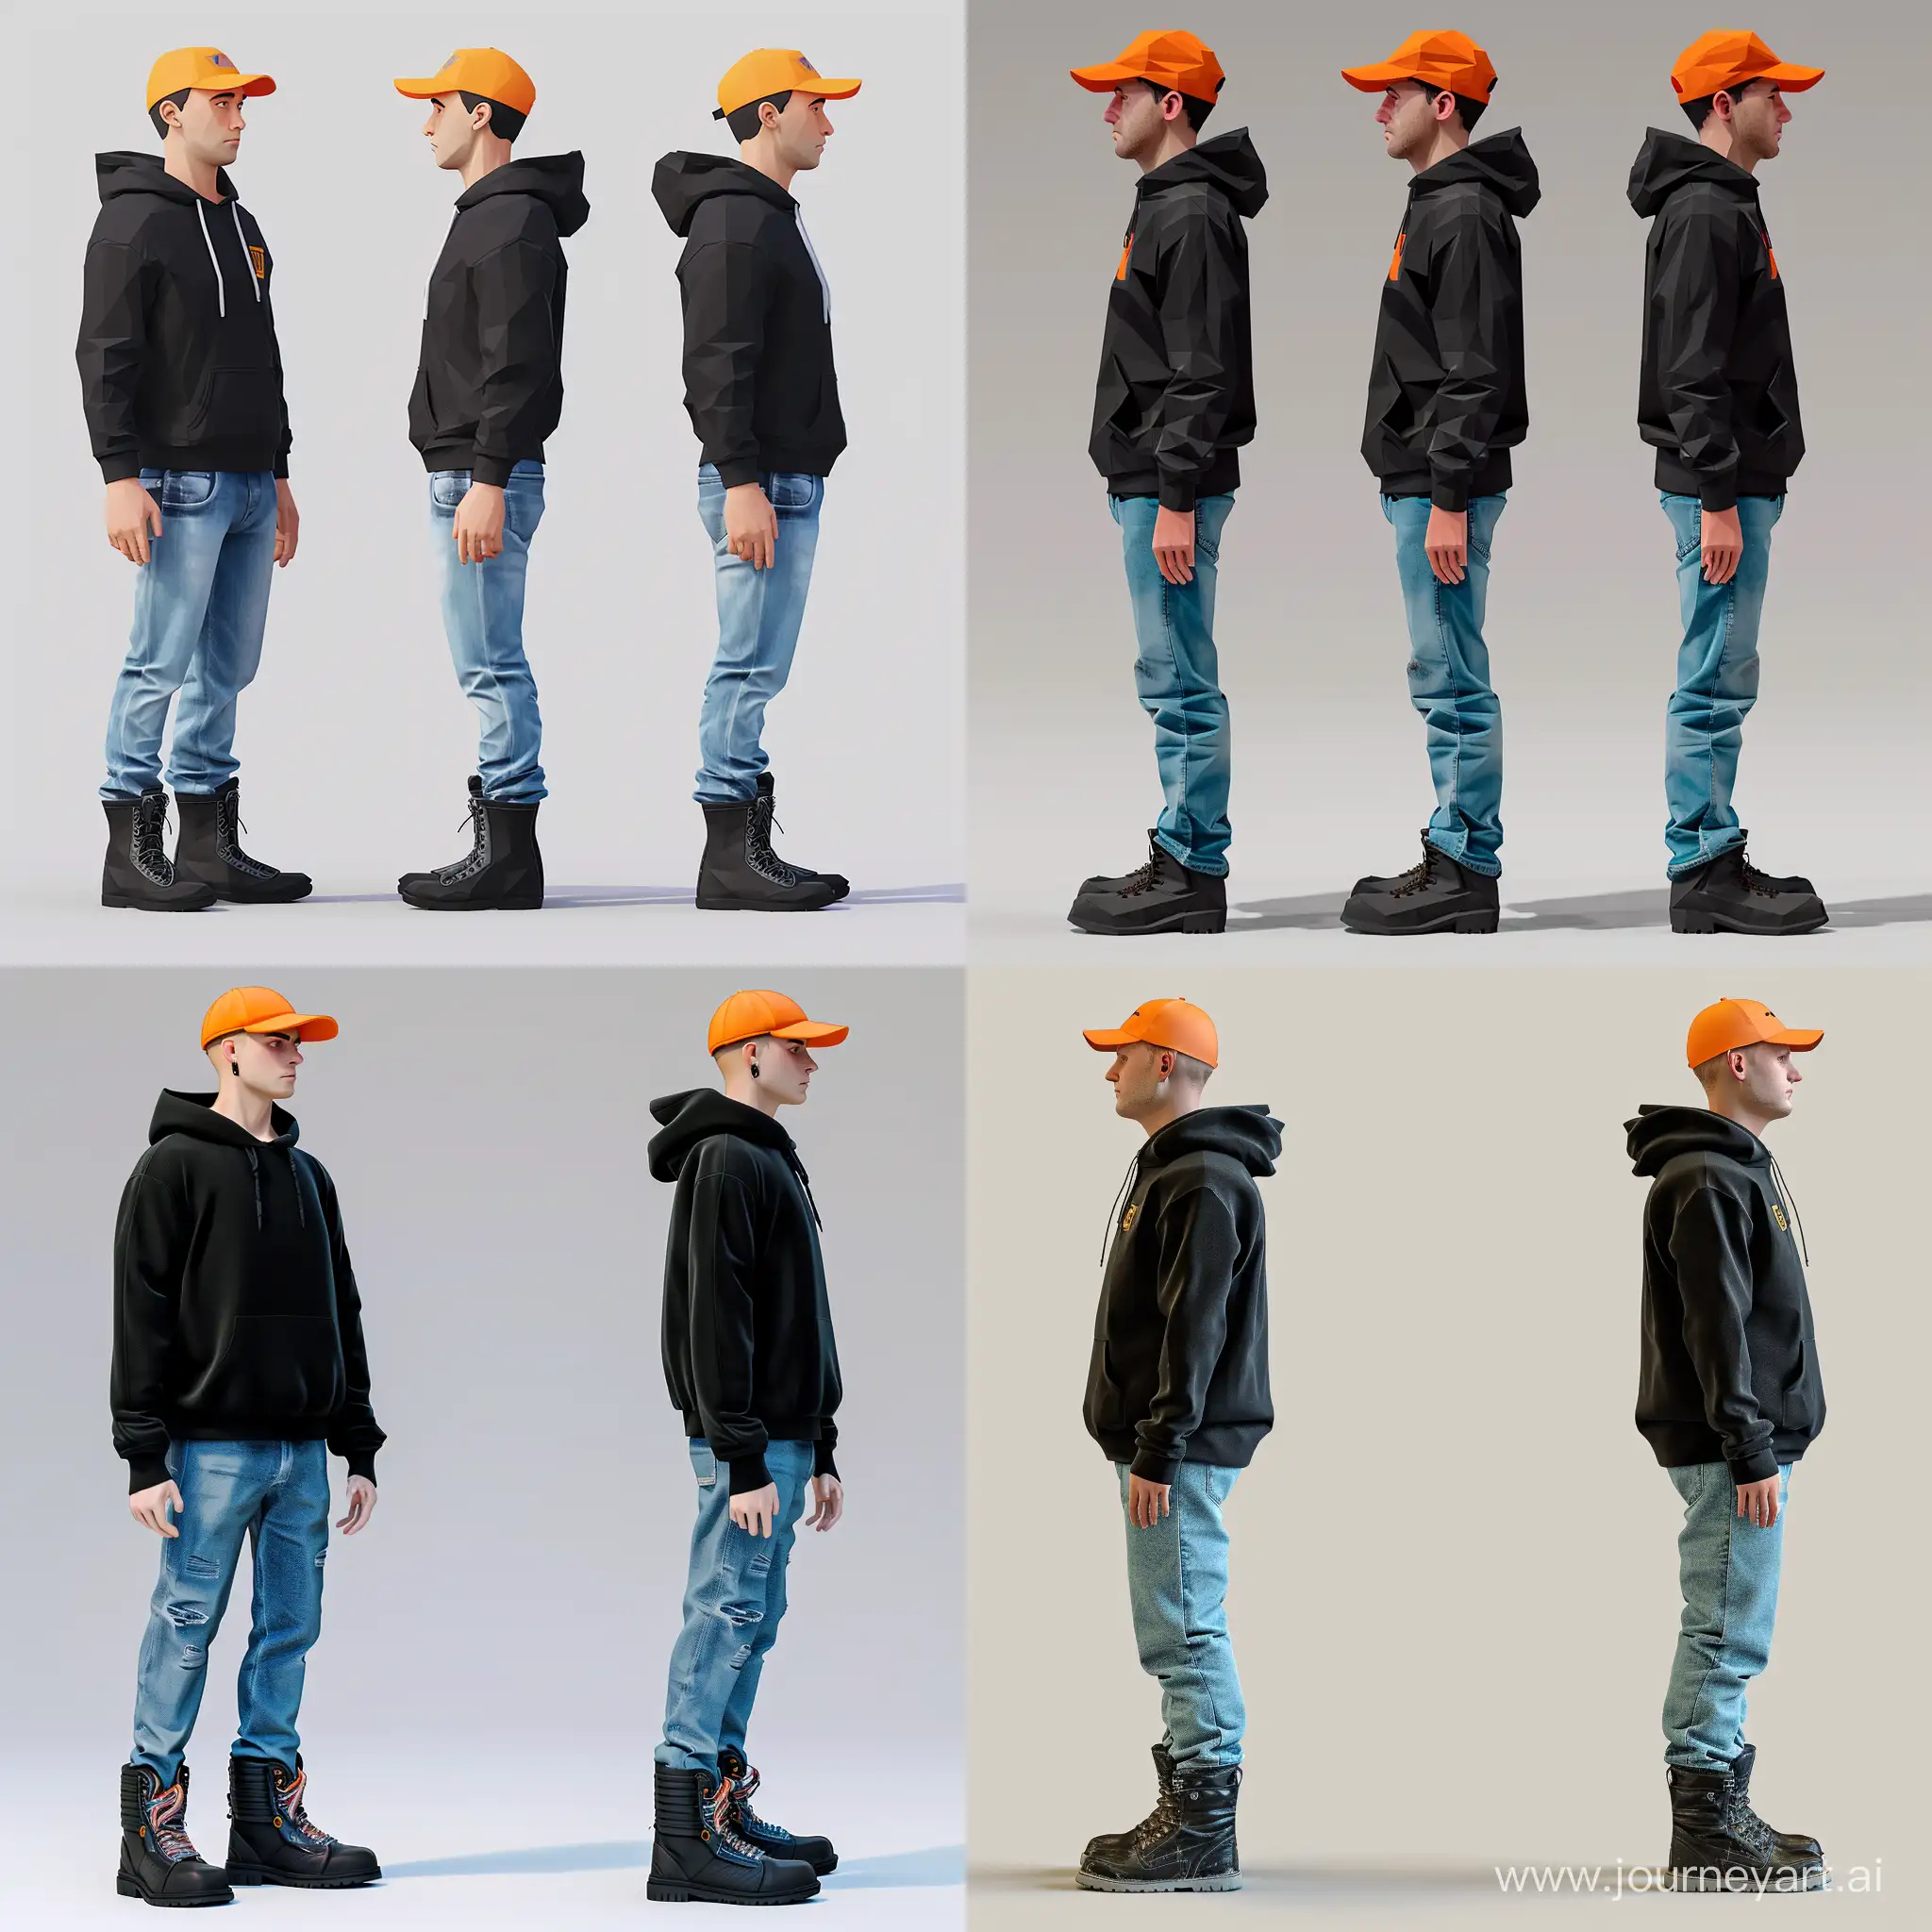 sample T-pose(for game) in left side(only lef side!) lowpoly human mam model, in black hoodie, blue jeans, black boots, orange cap.